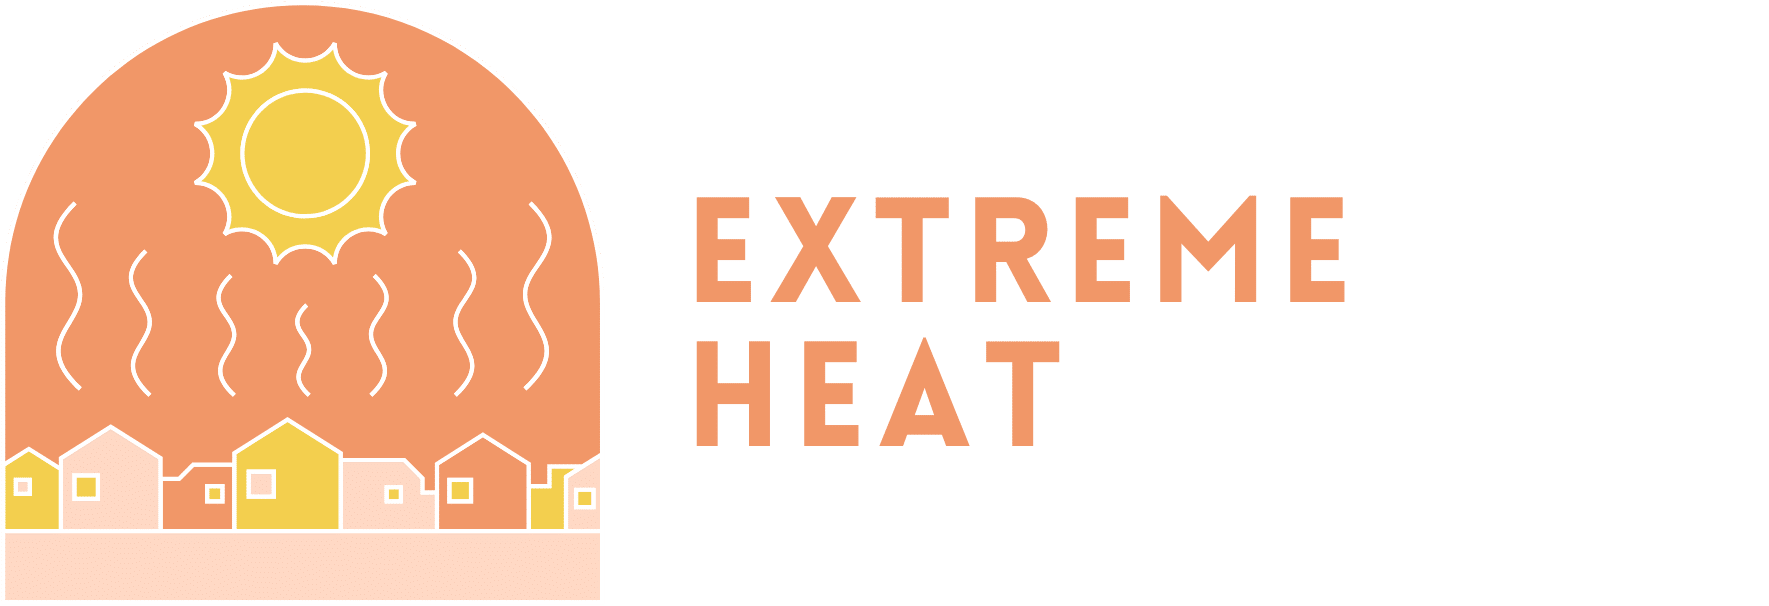 Text reading "Extreme Heat" next to image of houses under a sun and waves of heat